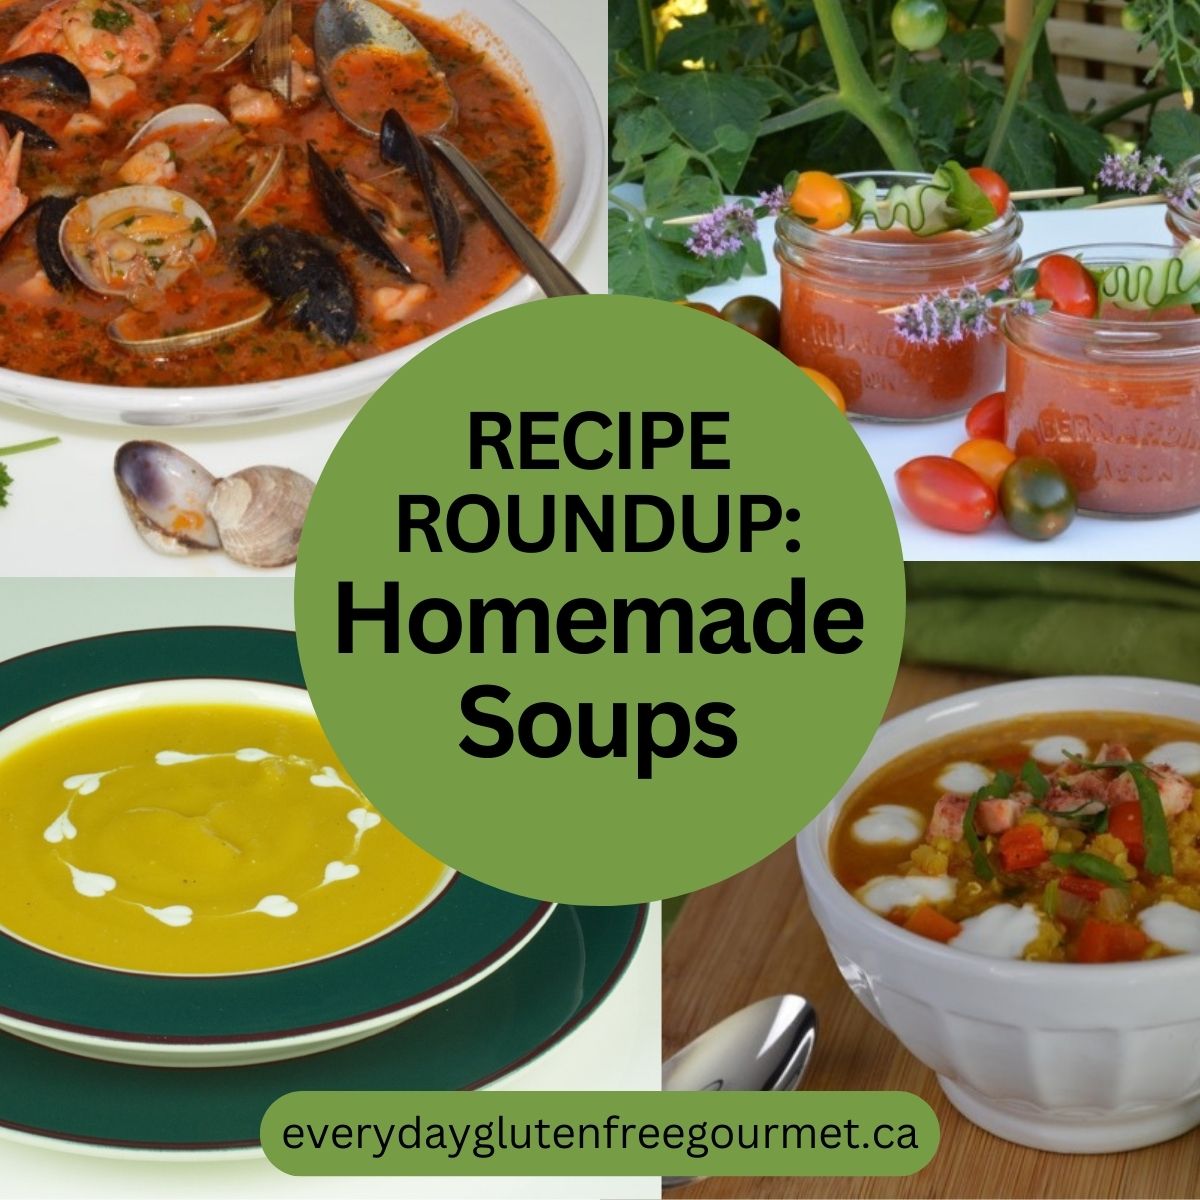 Four homemade soups: Italian seafood soup, gazpacho, butternut squash and red lentil soup.